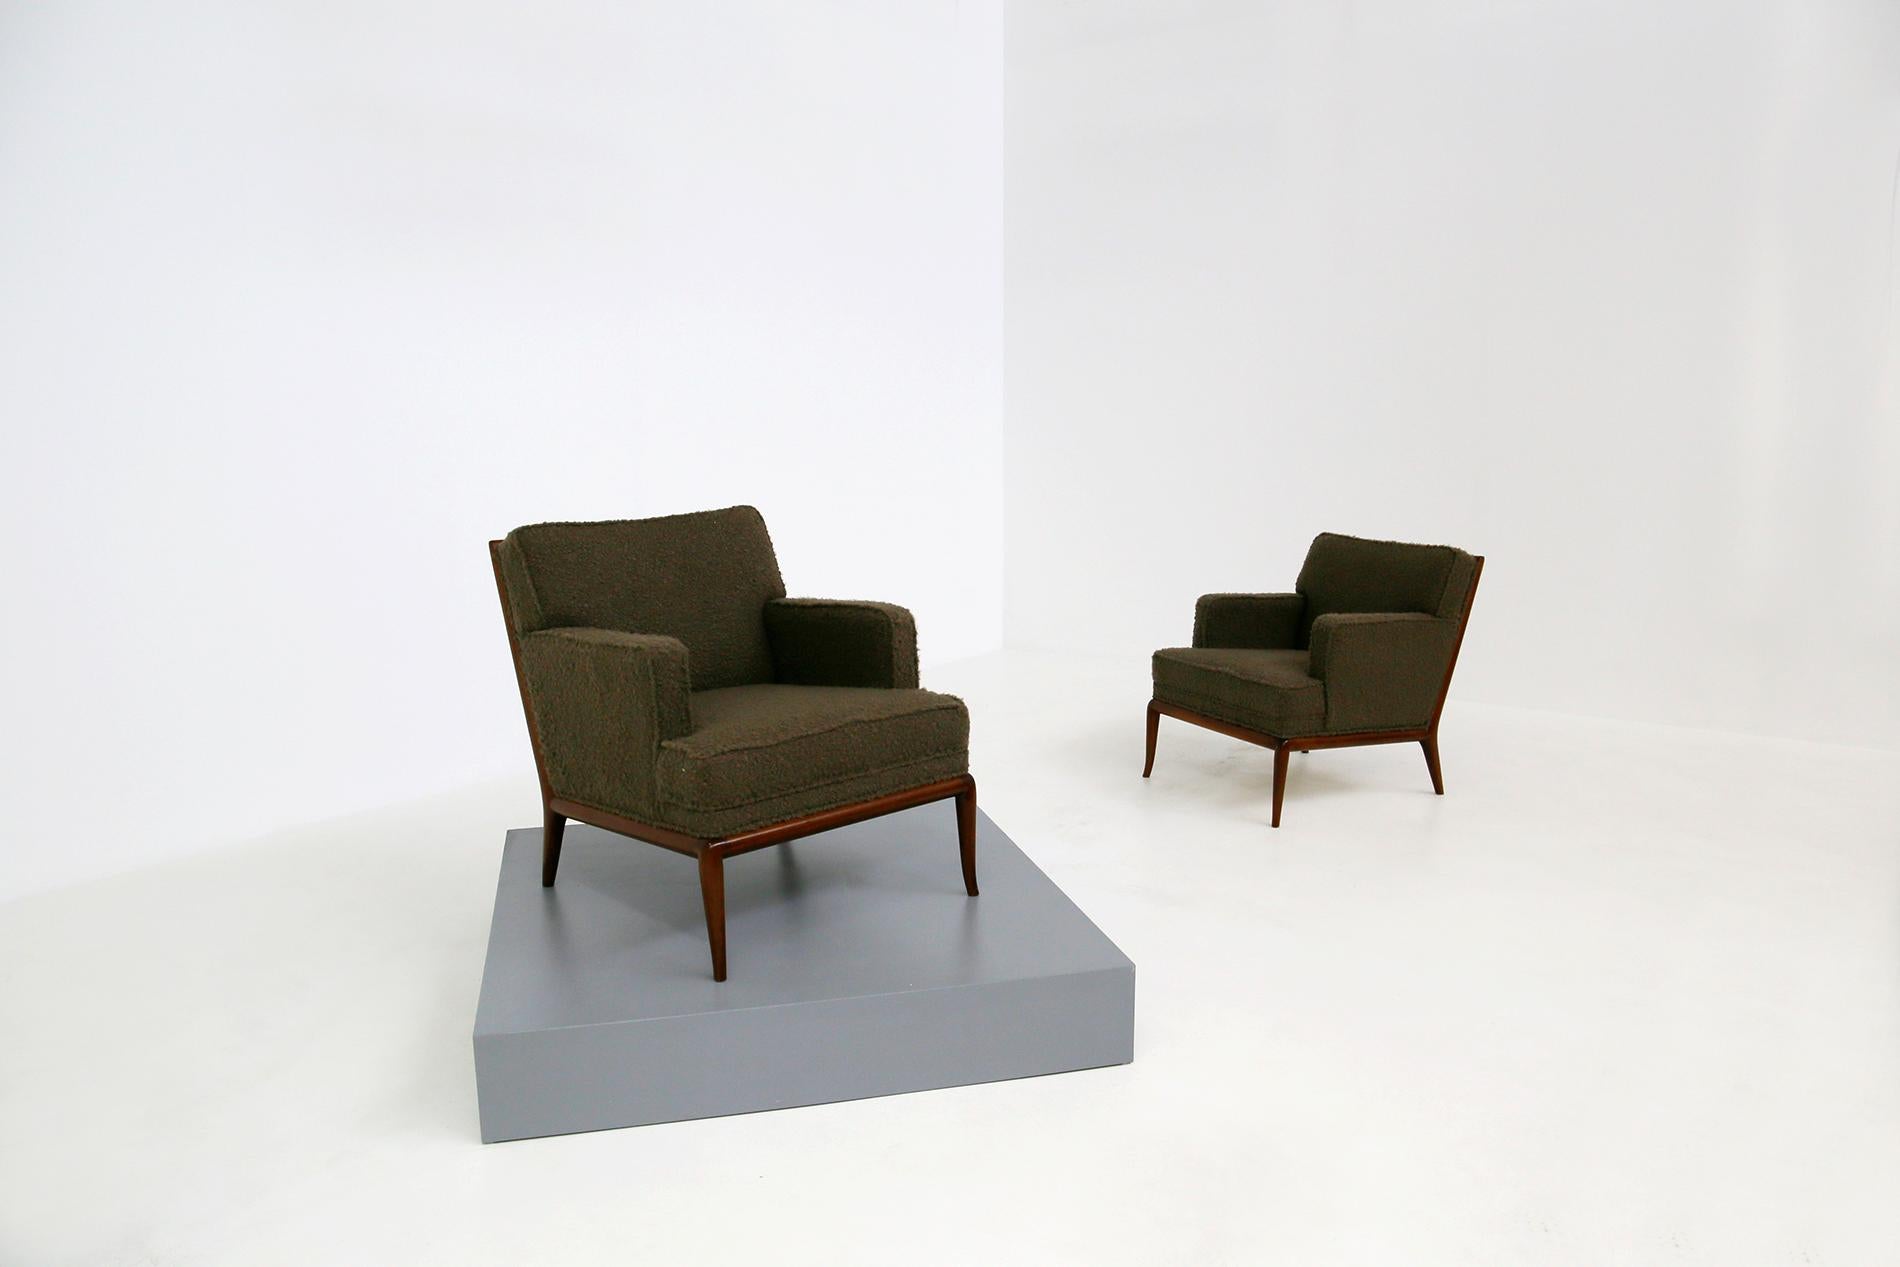 Elegant pair of lounge chairs by T.H. Robsjohn-Gibbings from the 1950s for Widdicomb, American. The pair of armchairs has been restored in an elegant brown bouclé fabric. Its structure is made of skilfully worked walnut wood. Its feet have a